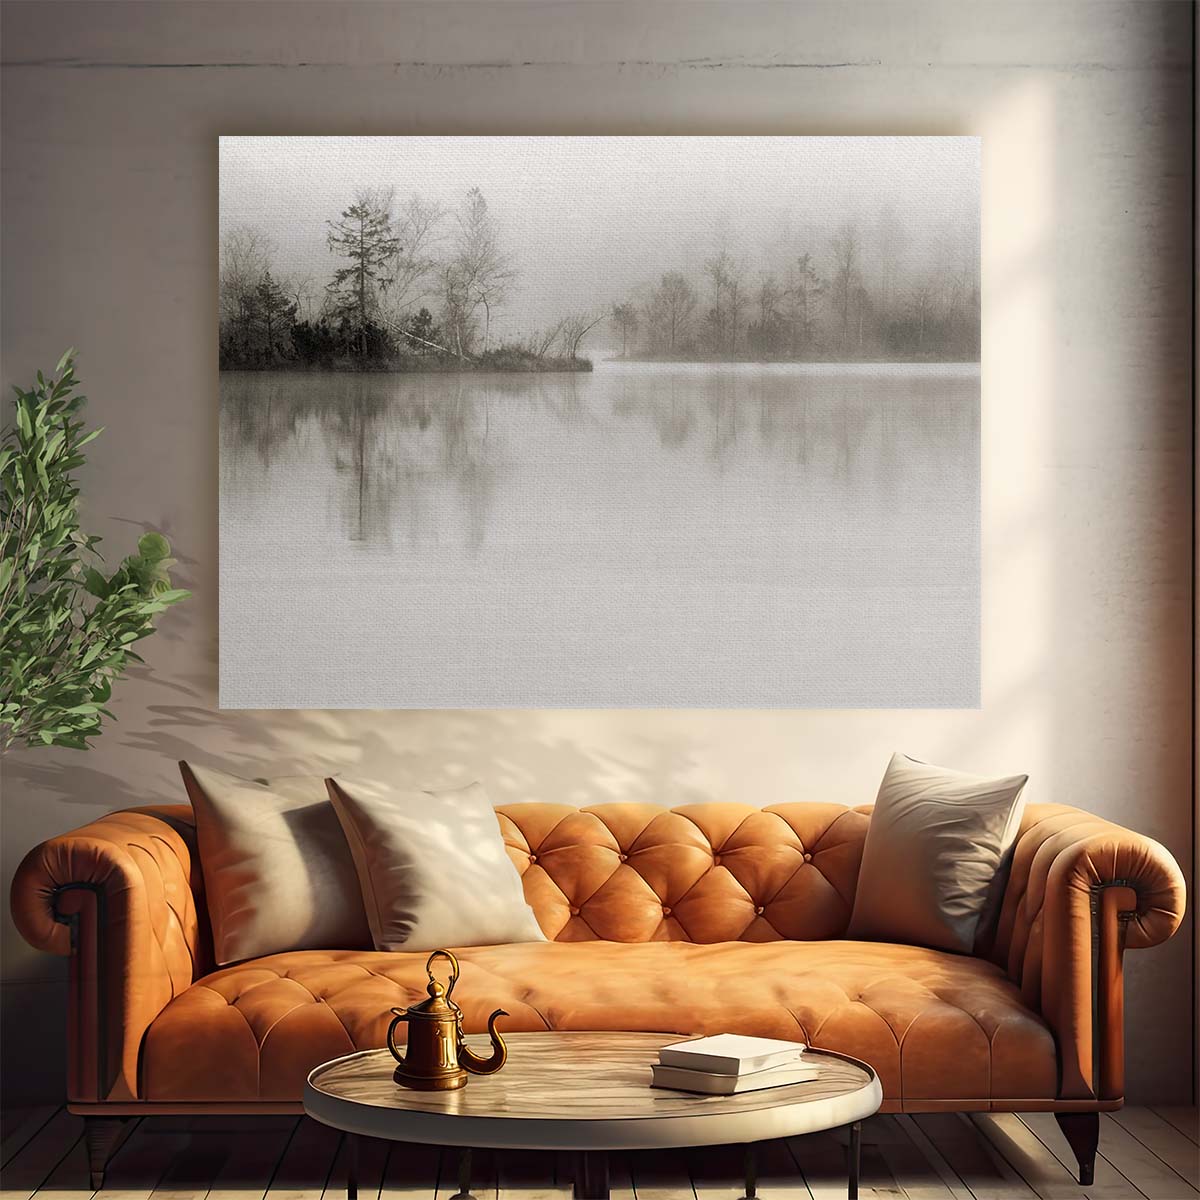 Serene Austrian Lake & Forest Mist Wall Art by Luxuriance Designs. Made in USA.